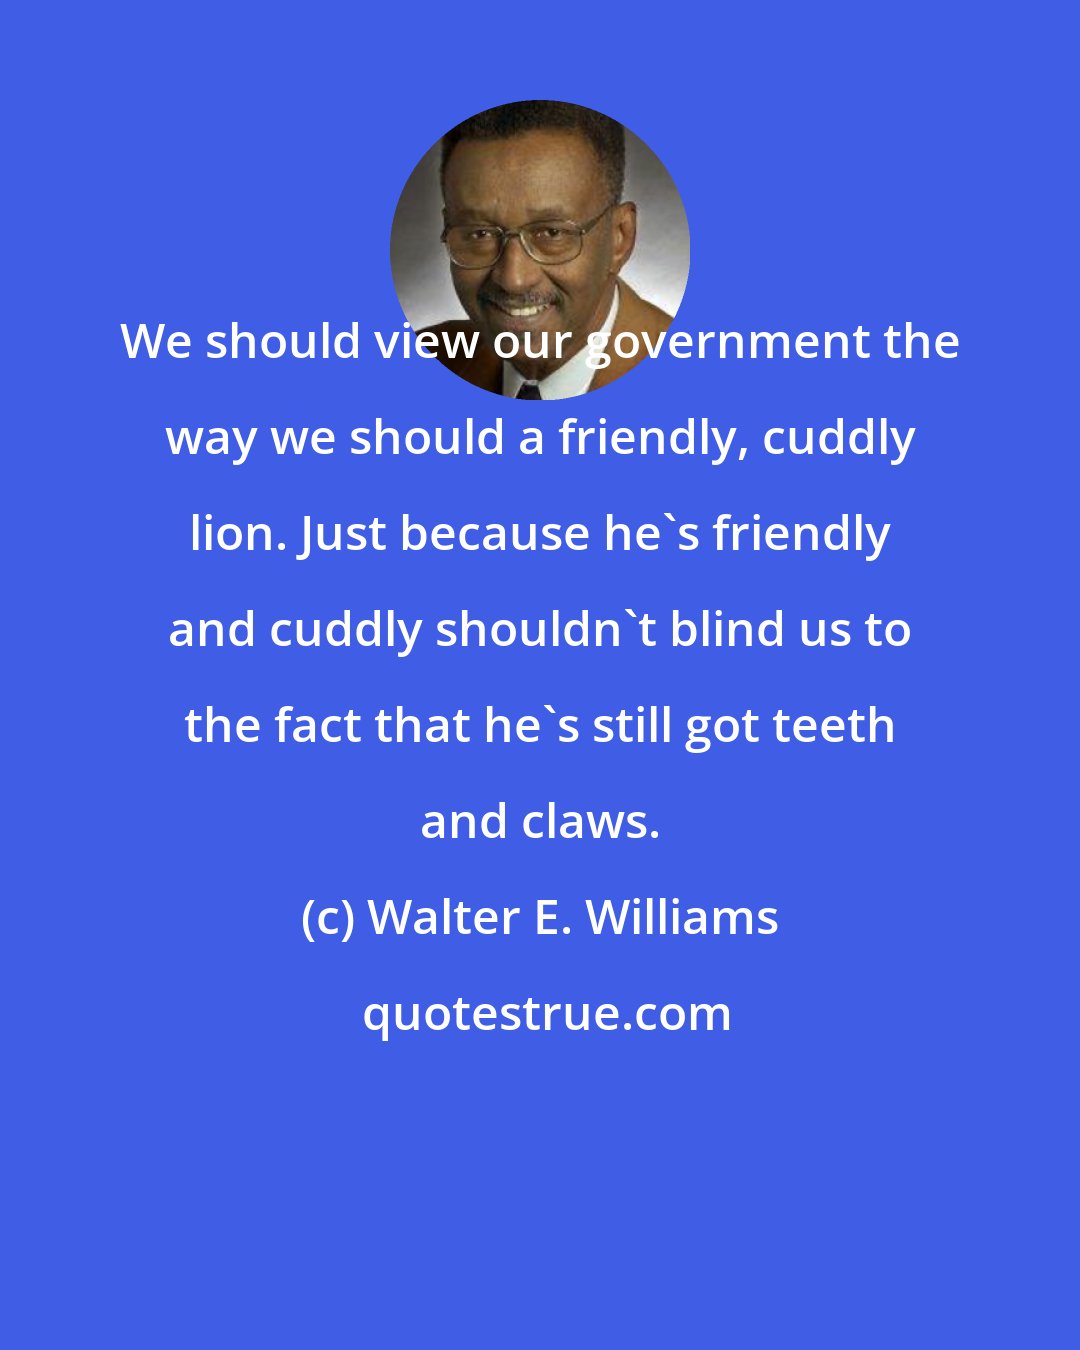 Walter E. Williams: We should view our government the way we should a friendly, cuddly lion. Just because he's friendly and cuddly shouldn't blind us to the fact that he's still got teeth and claws.